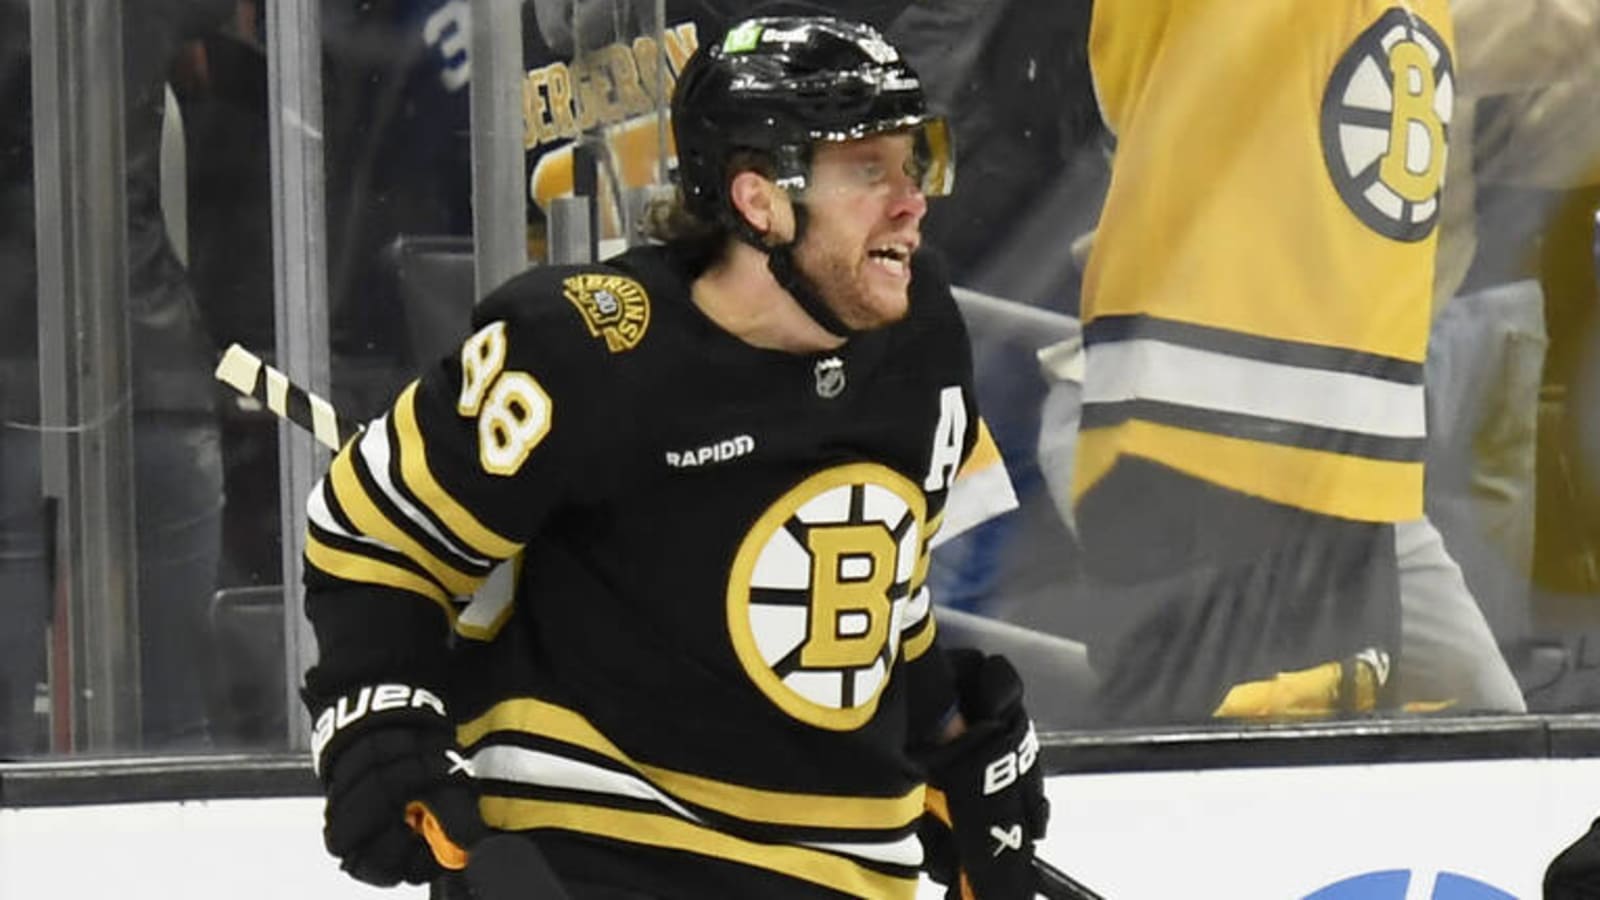 David Pastrnak knocks Leafs out of playoffs with OT goal in Game 7